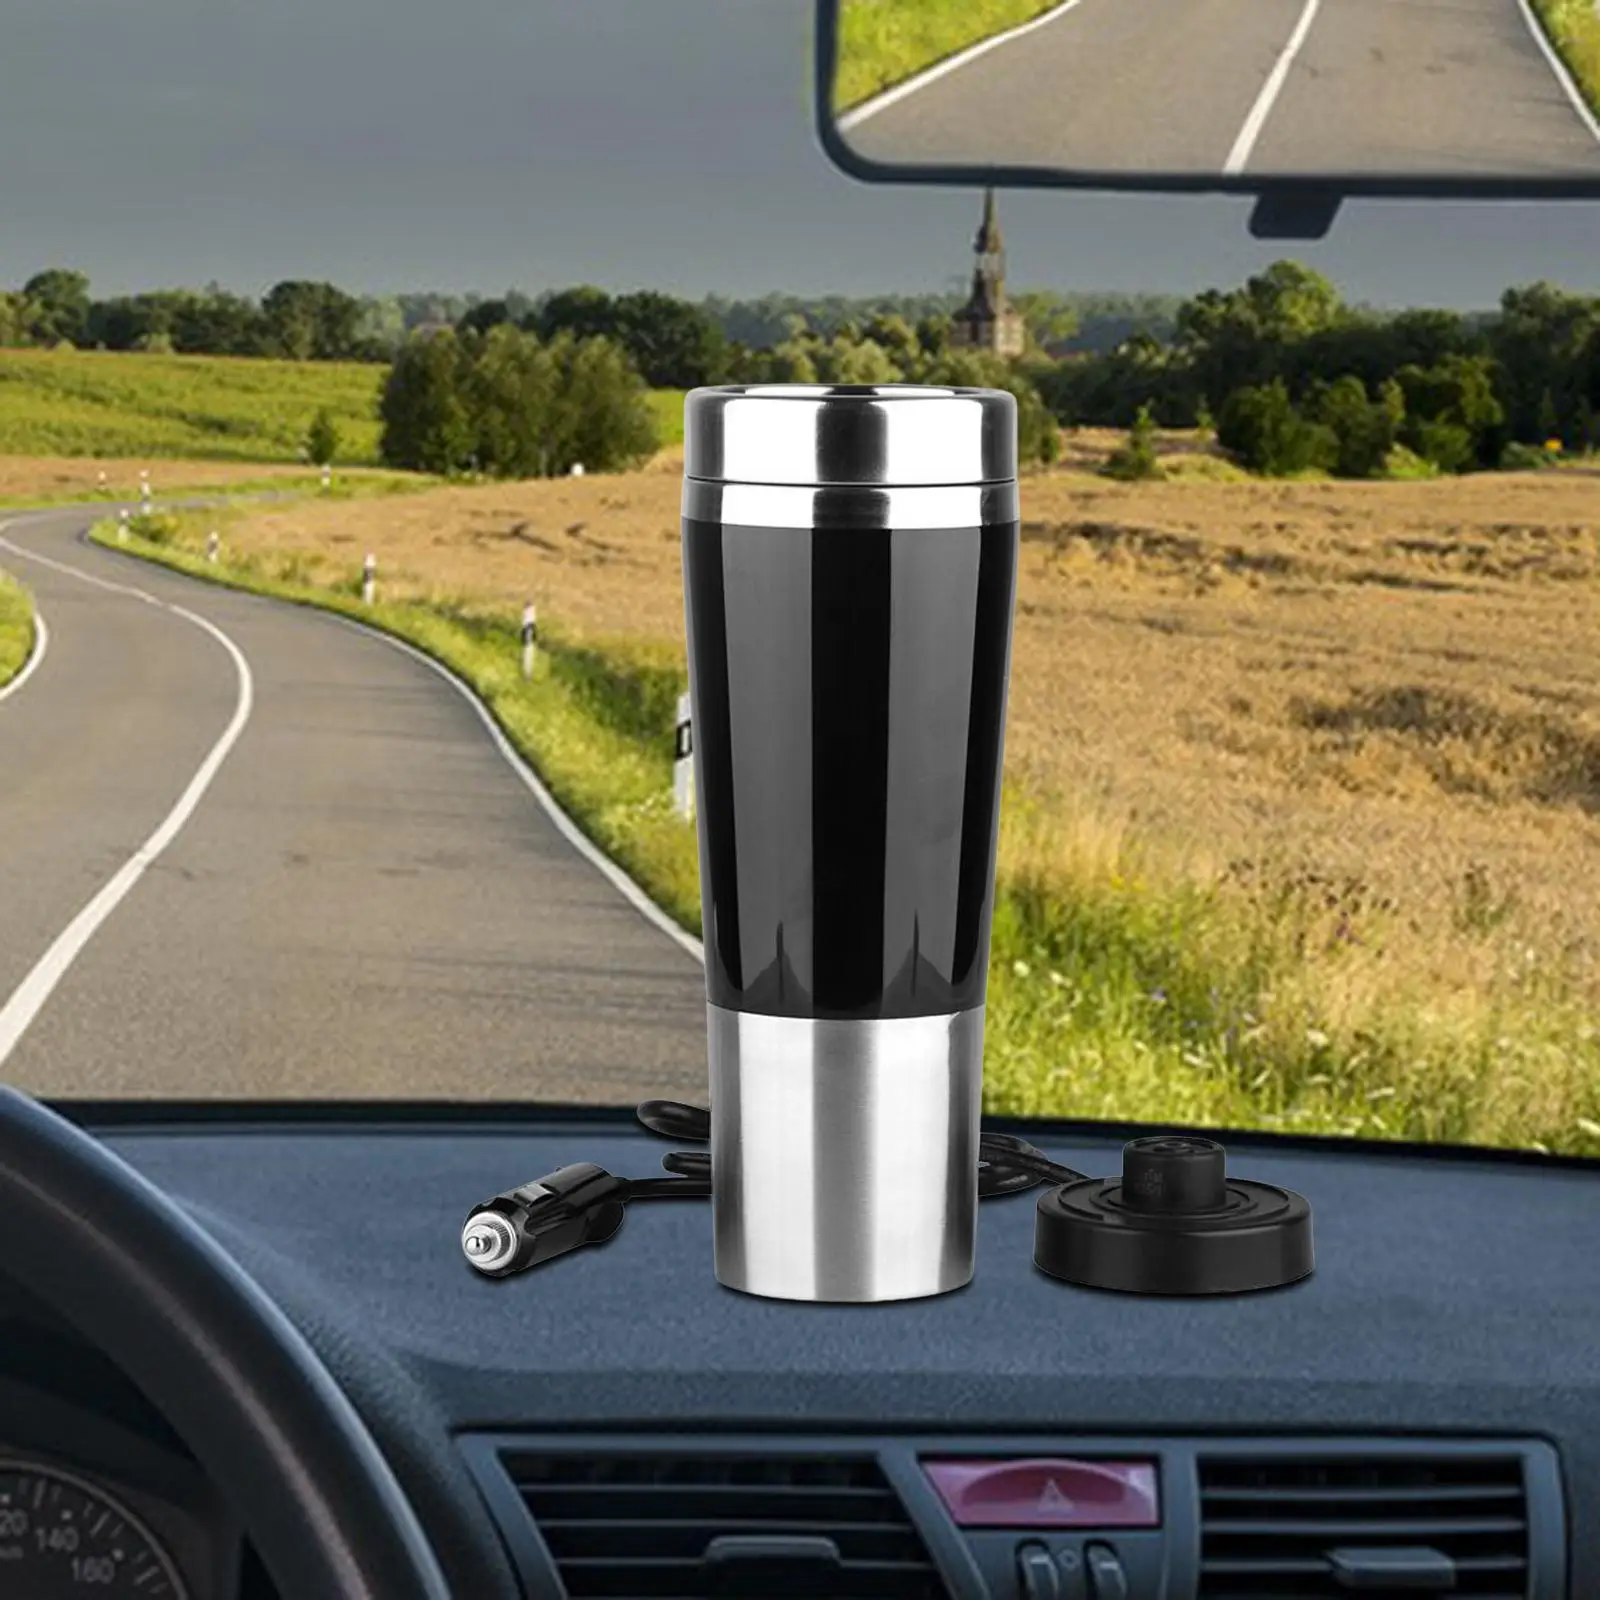 Portable 12V Car Kettle Boiler Heating 450ml Heated Water Boiler Insulated Cup for Milk Camping Travel